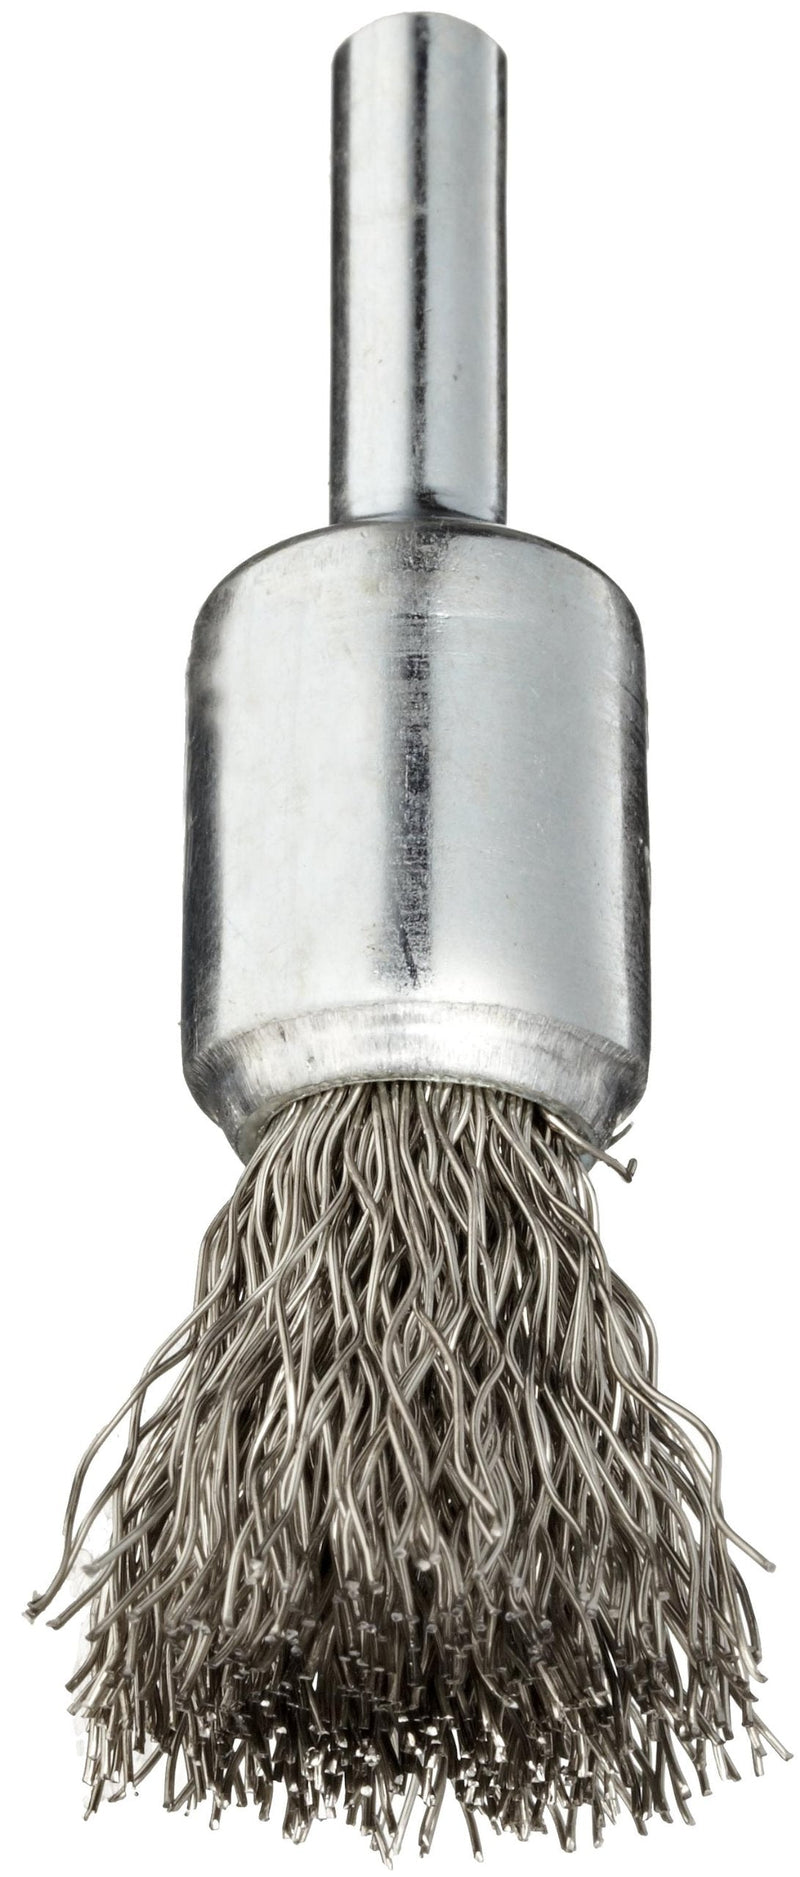  [AUSTRALIA] - Weiler 10015 1/2" Crimped Wire End Brush, .014" Stainless Steel Fill, Made in the USA 0.014" Wire Fill